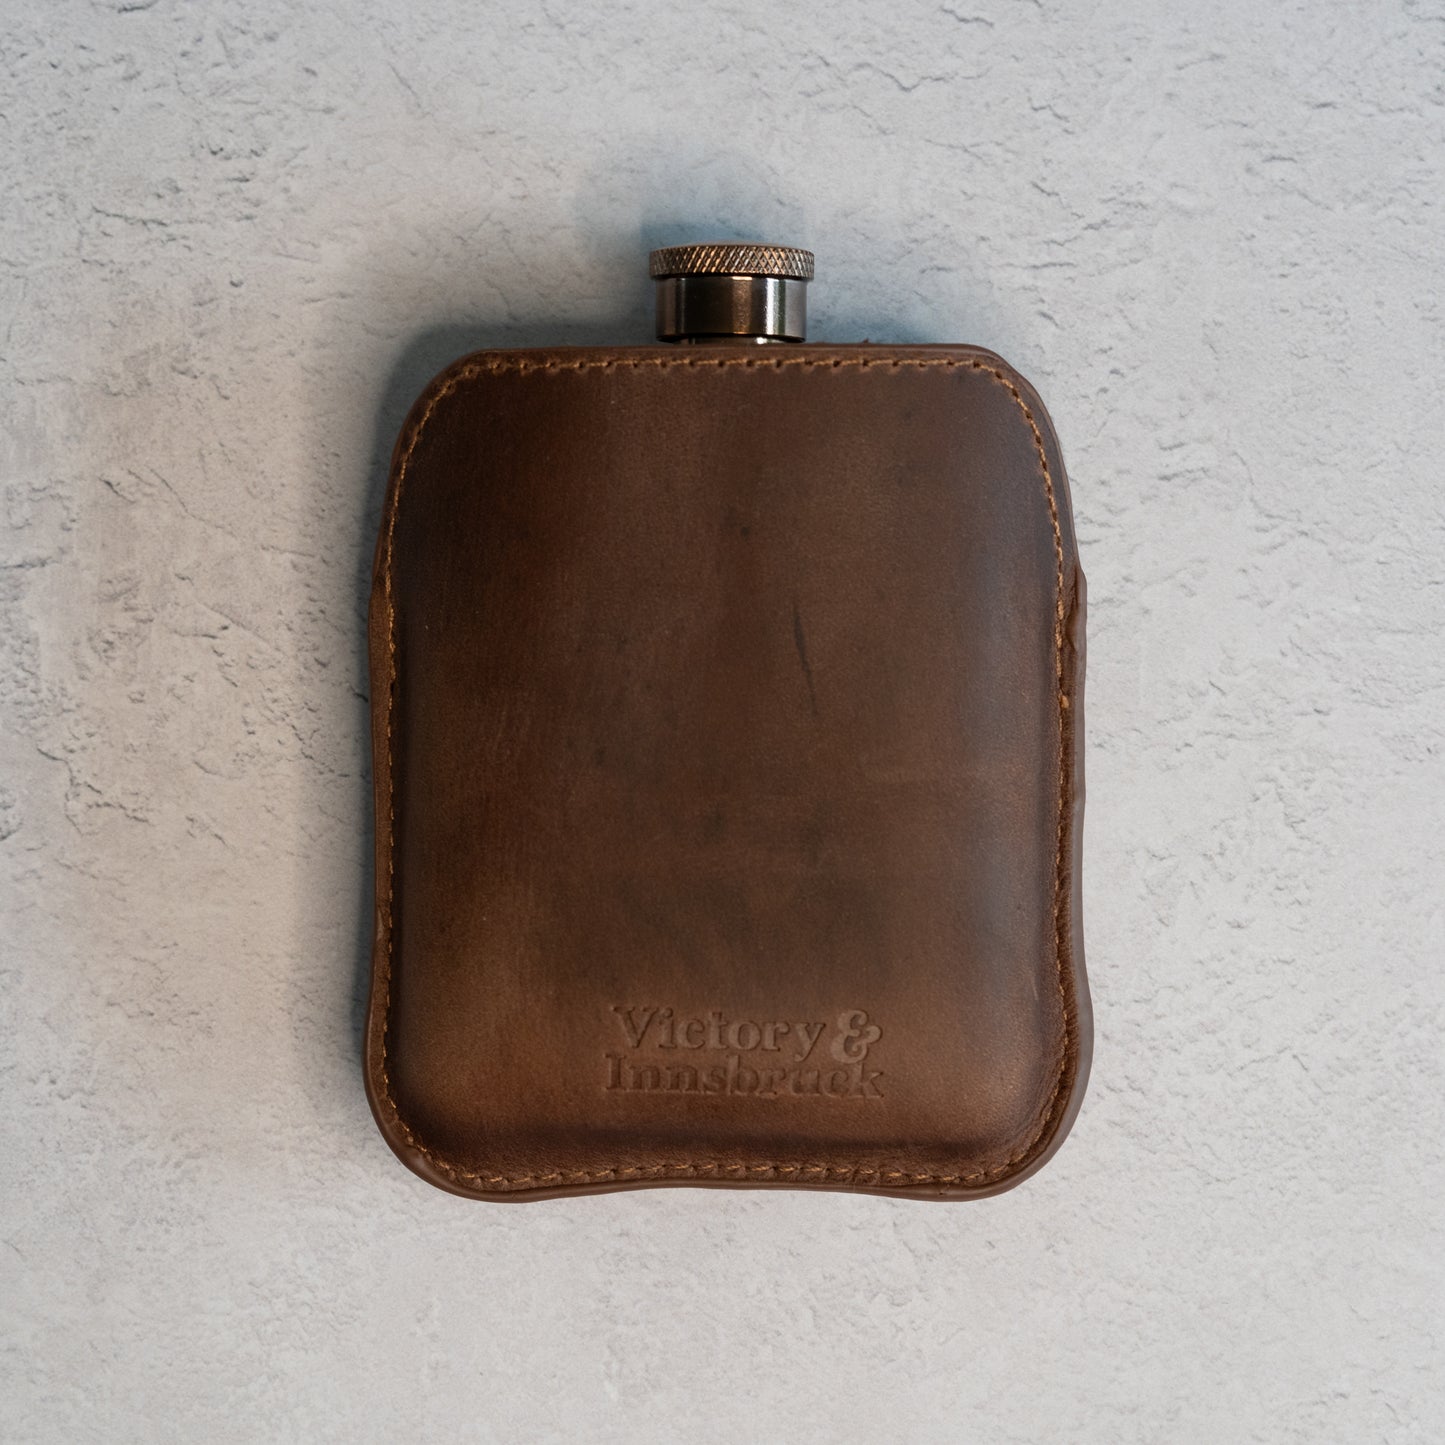 Full Grain Leather Cased Hip Flask | Full Brown Leather | Copper Flask